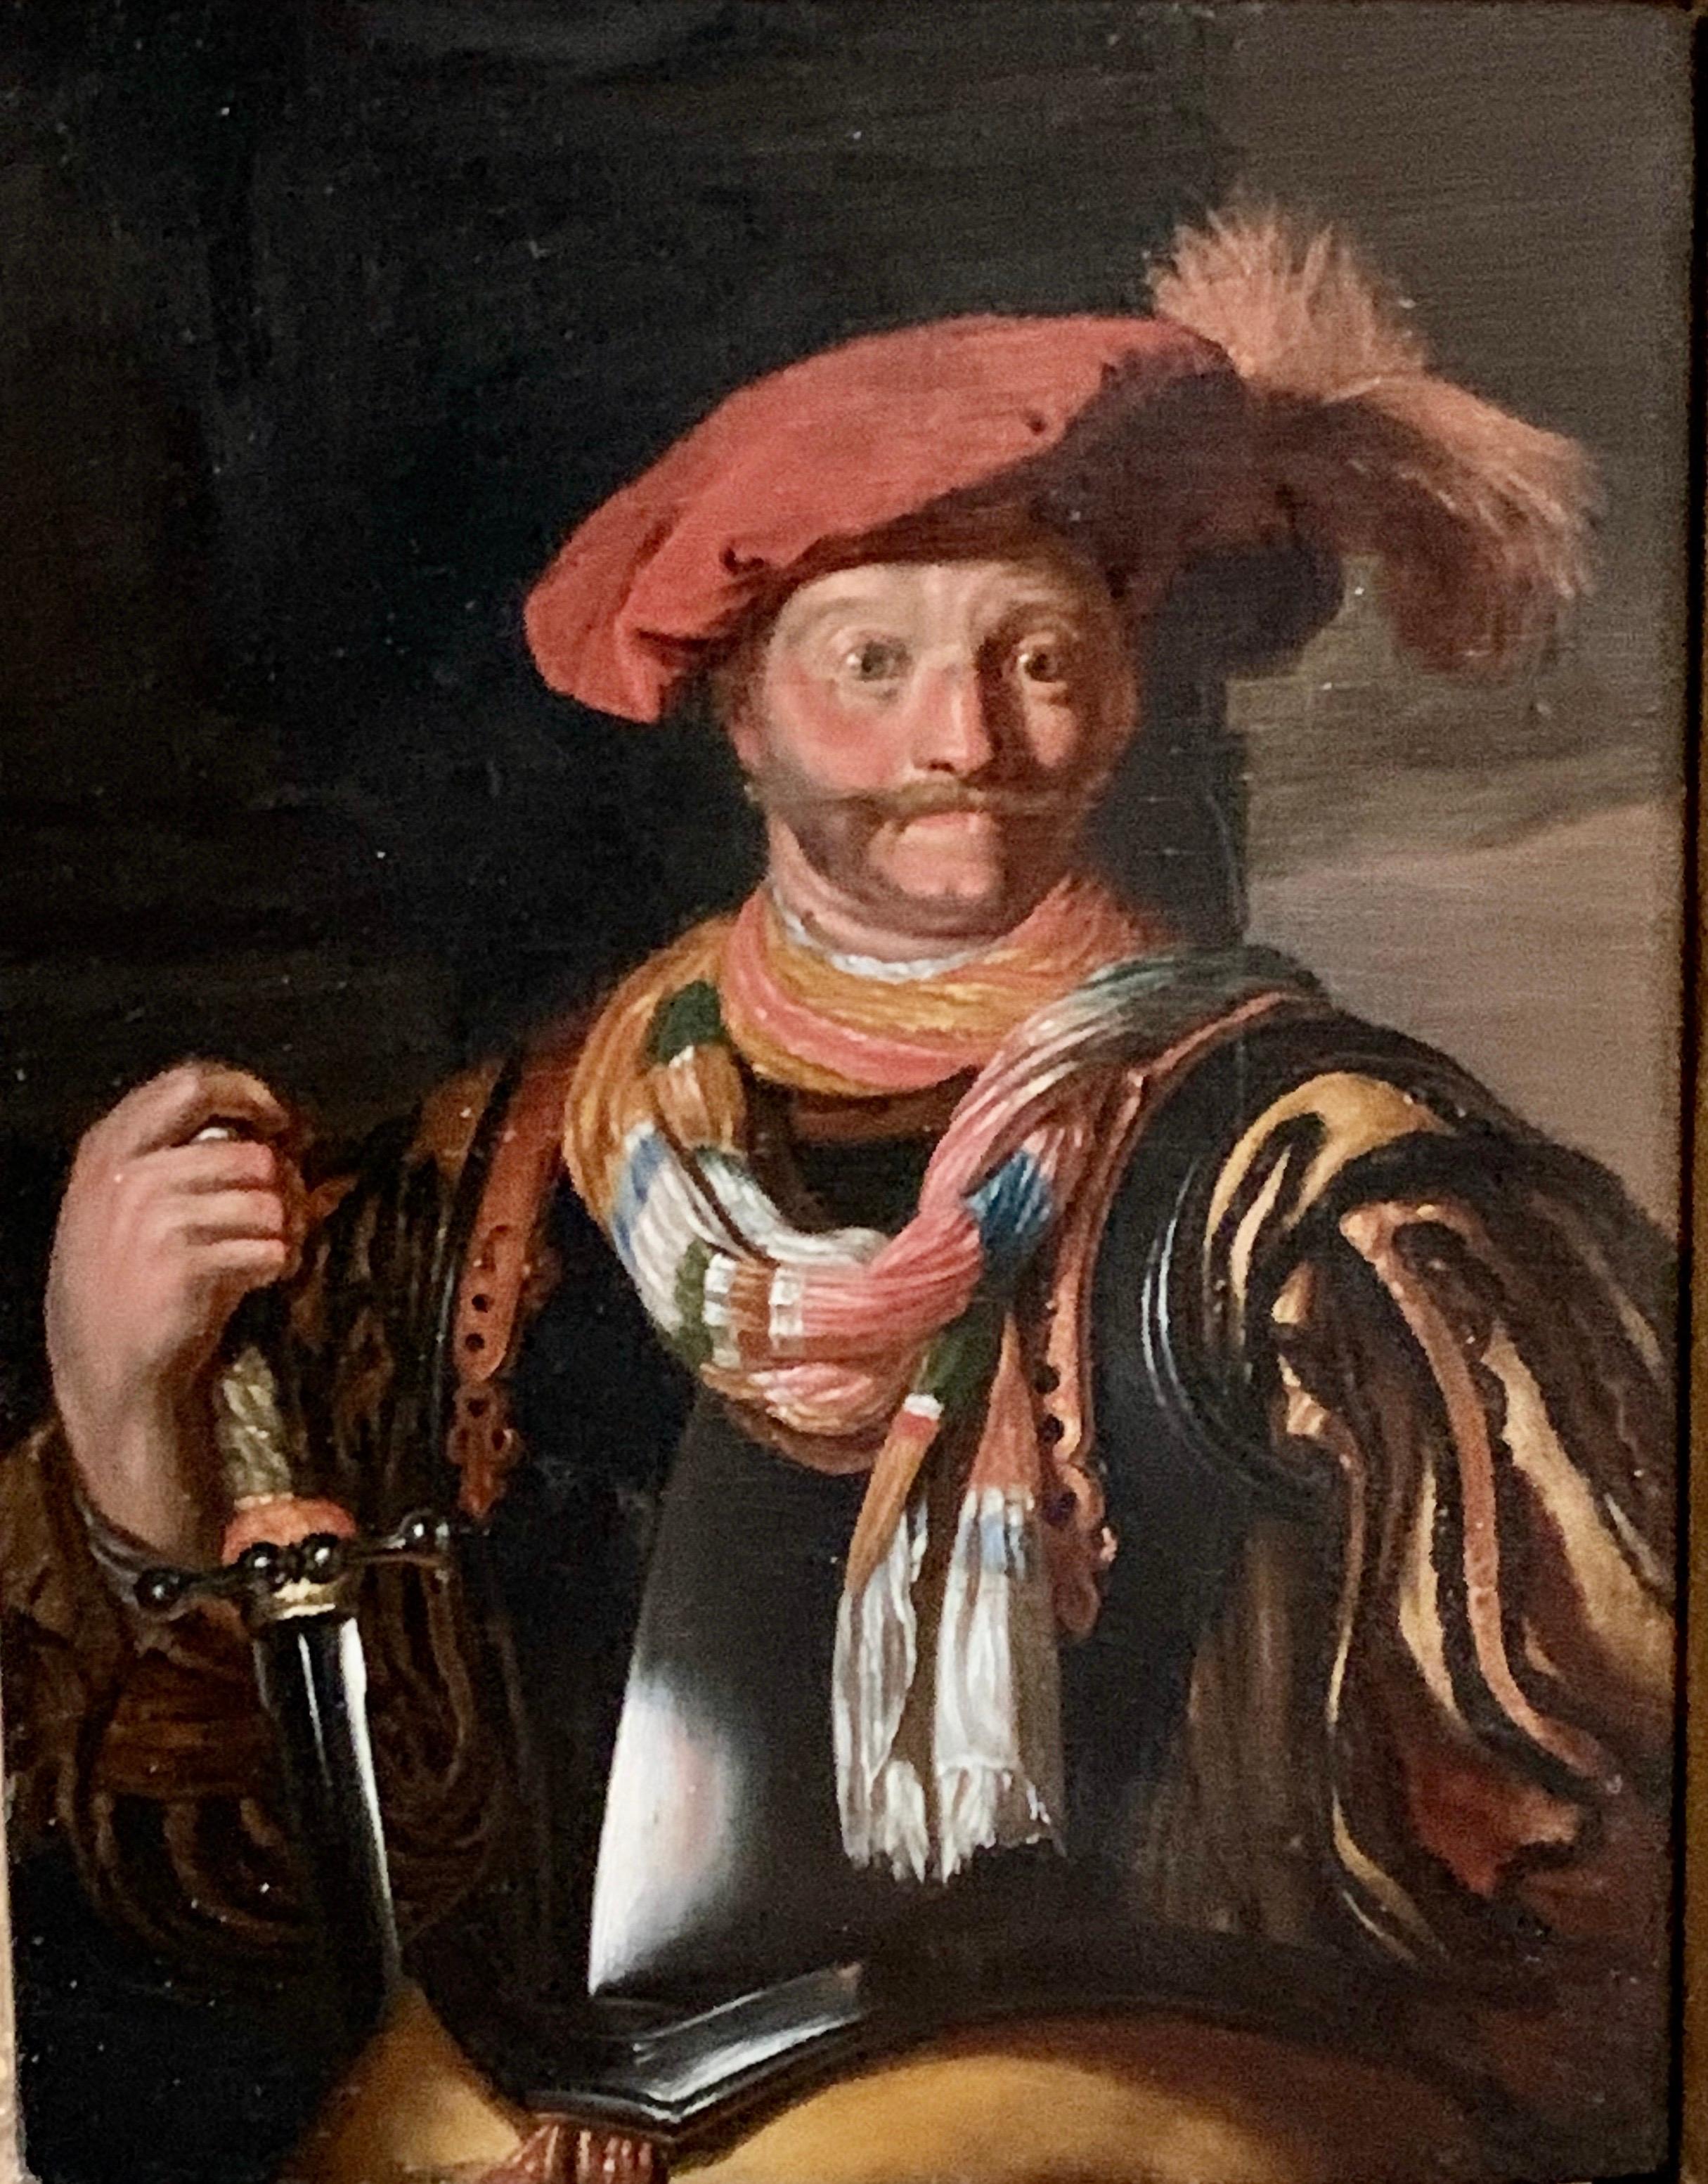 School of Haarlem circa 17th century
Portrait of a bearded gentleman, half length,
This looks like a portrait of the smiling Cavalier
Wearing a black shield a red Hat with a feather
He holds a sword and a colourful scarf.
A very nicely painted oil